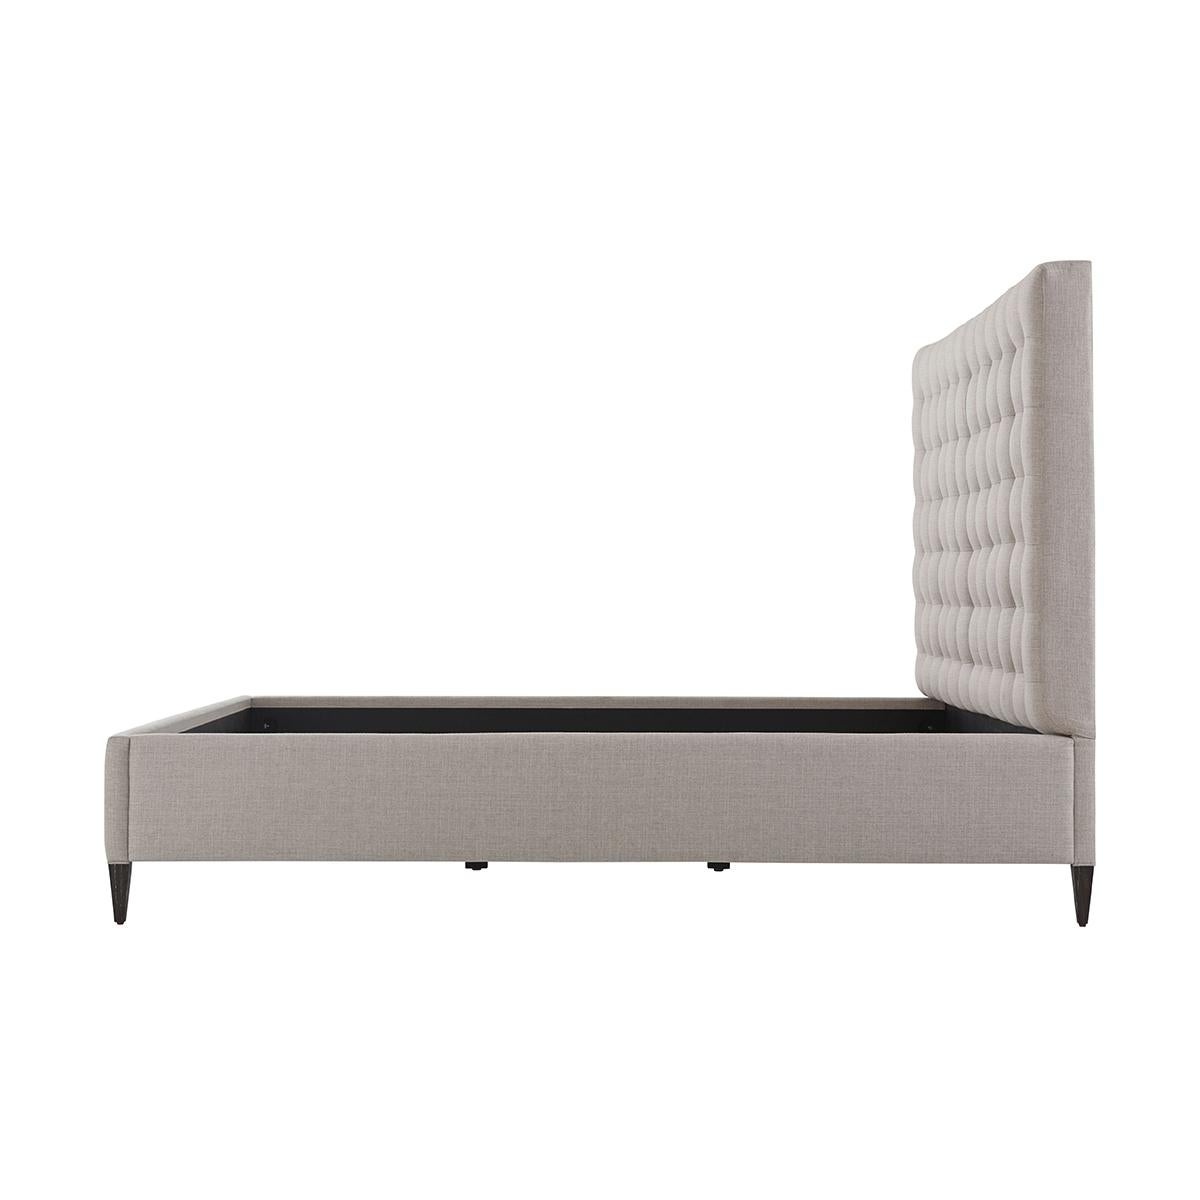 Vietnamese Art Deco Inspired Tufted King Bed For Sale